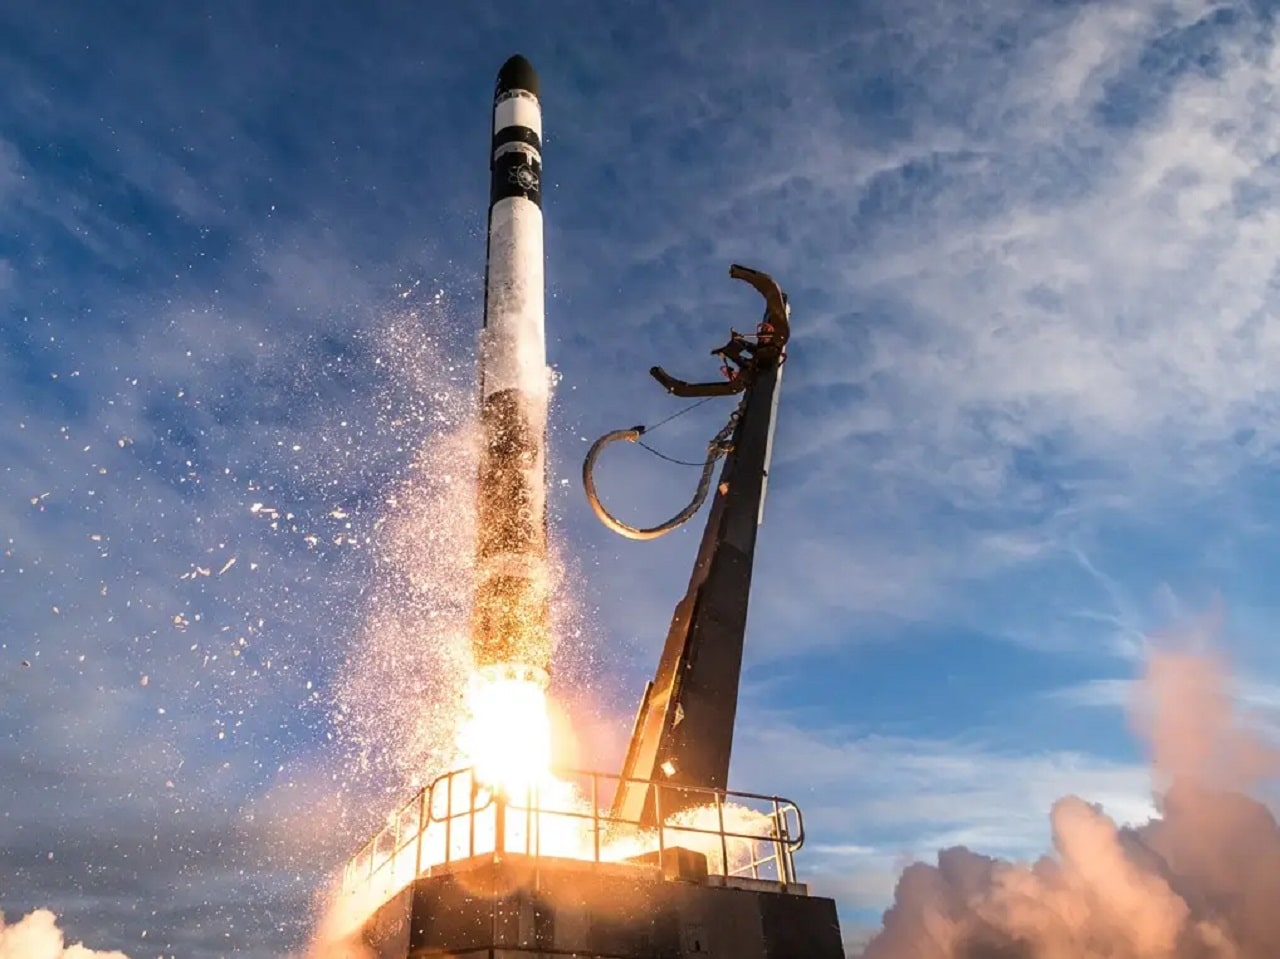 A Rocket Lab Electron launch vehicle lifts off from Launch Complex 1.